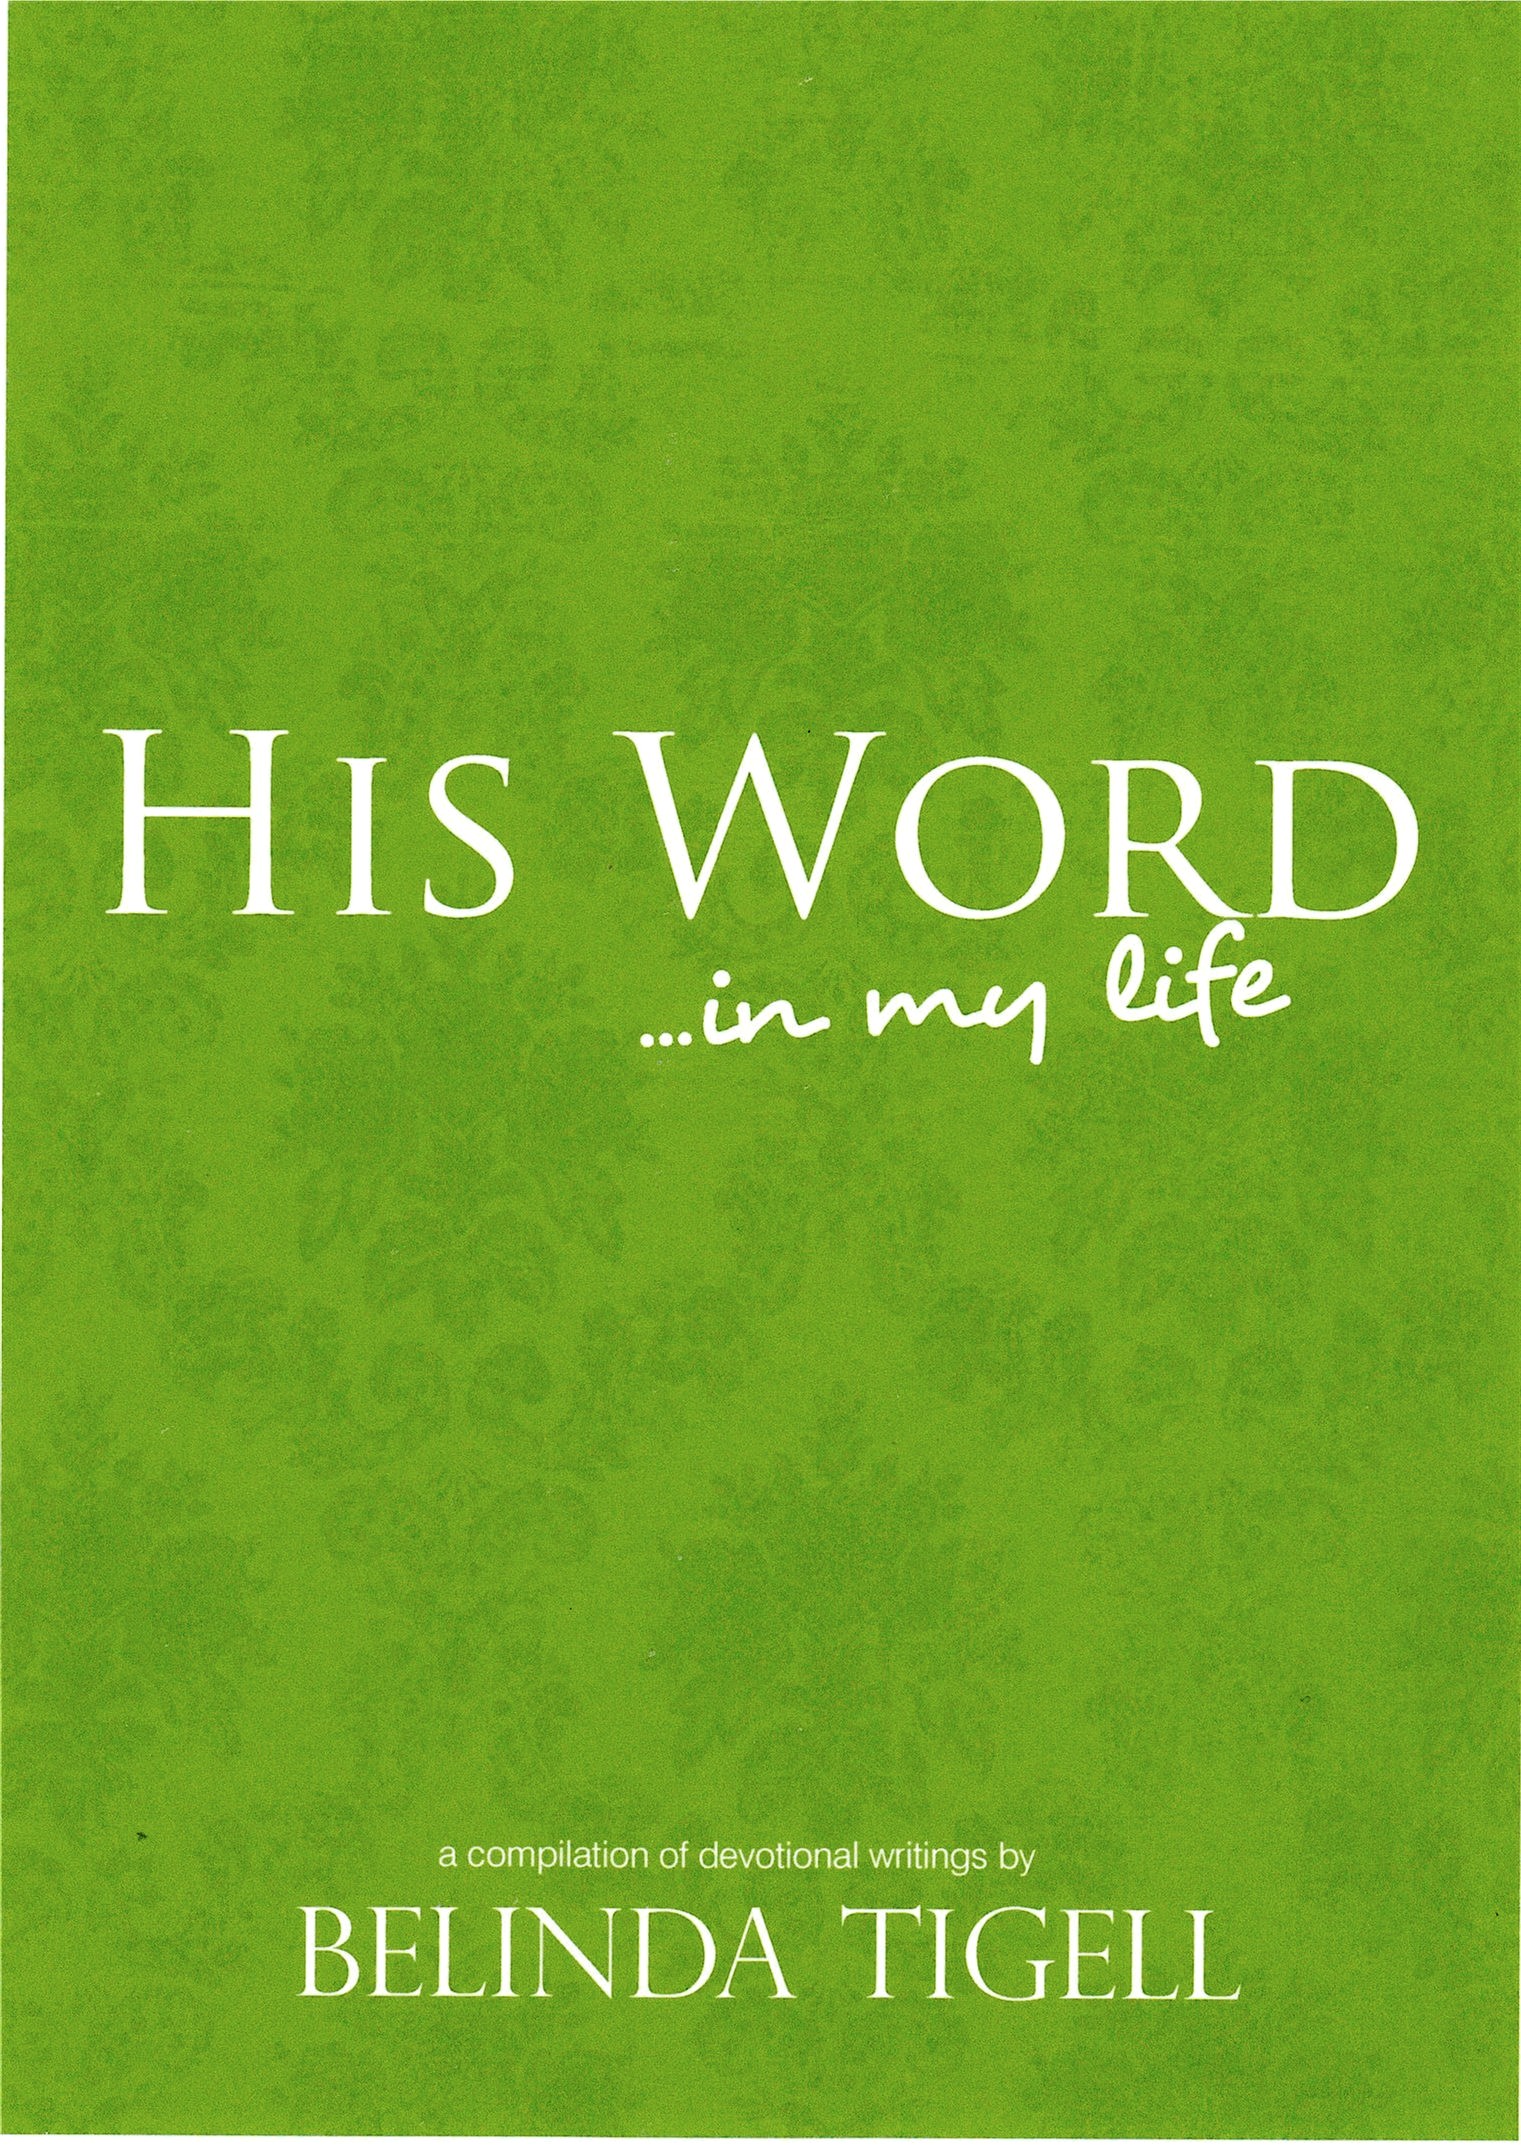 His Word in My Life - a compilation of devotional writings by Belinda Tigell